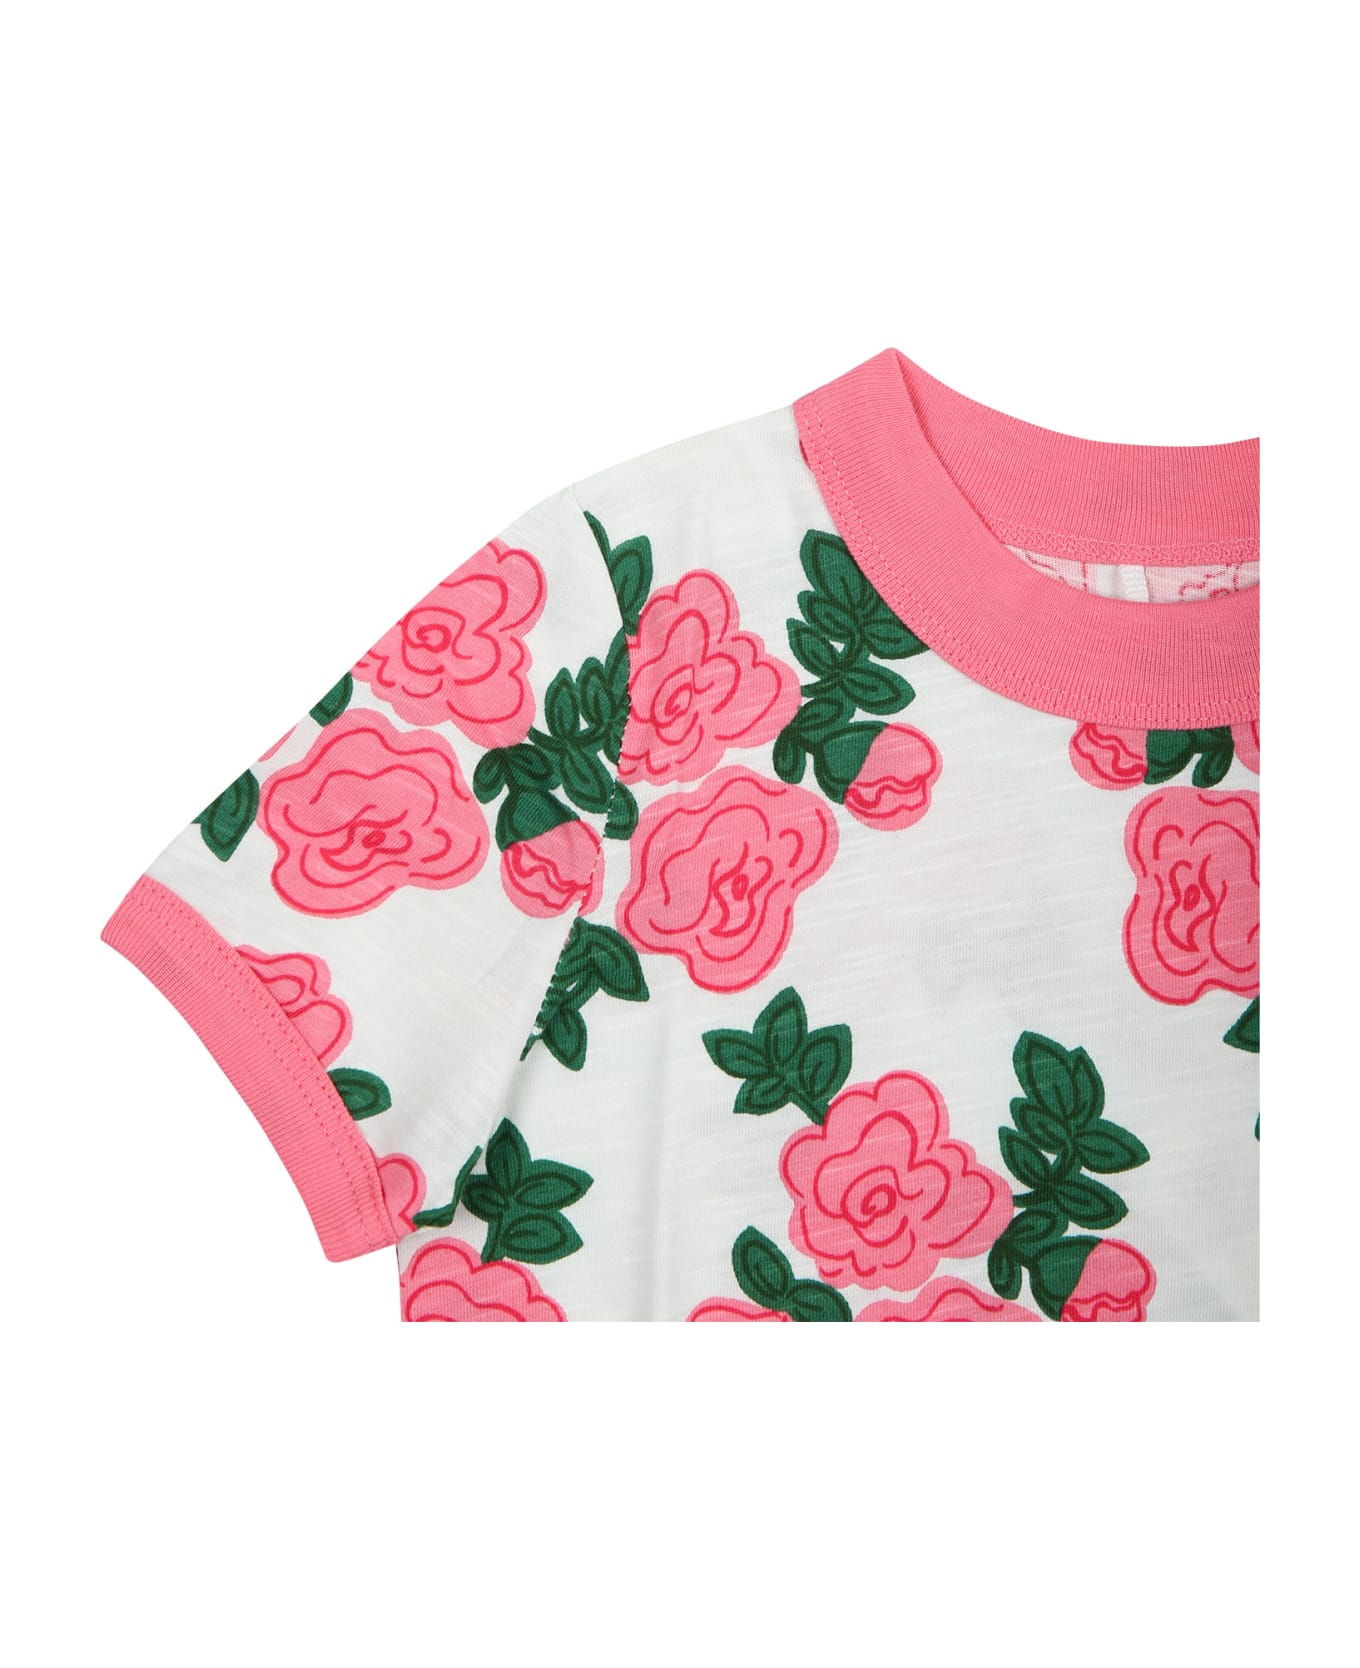 Mini Rodini White T-shirt For Baby Girl With Rose - White